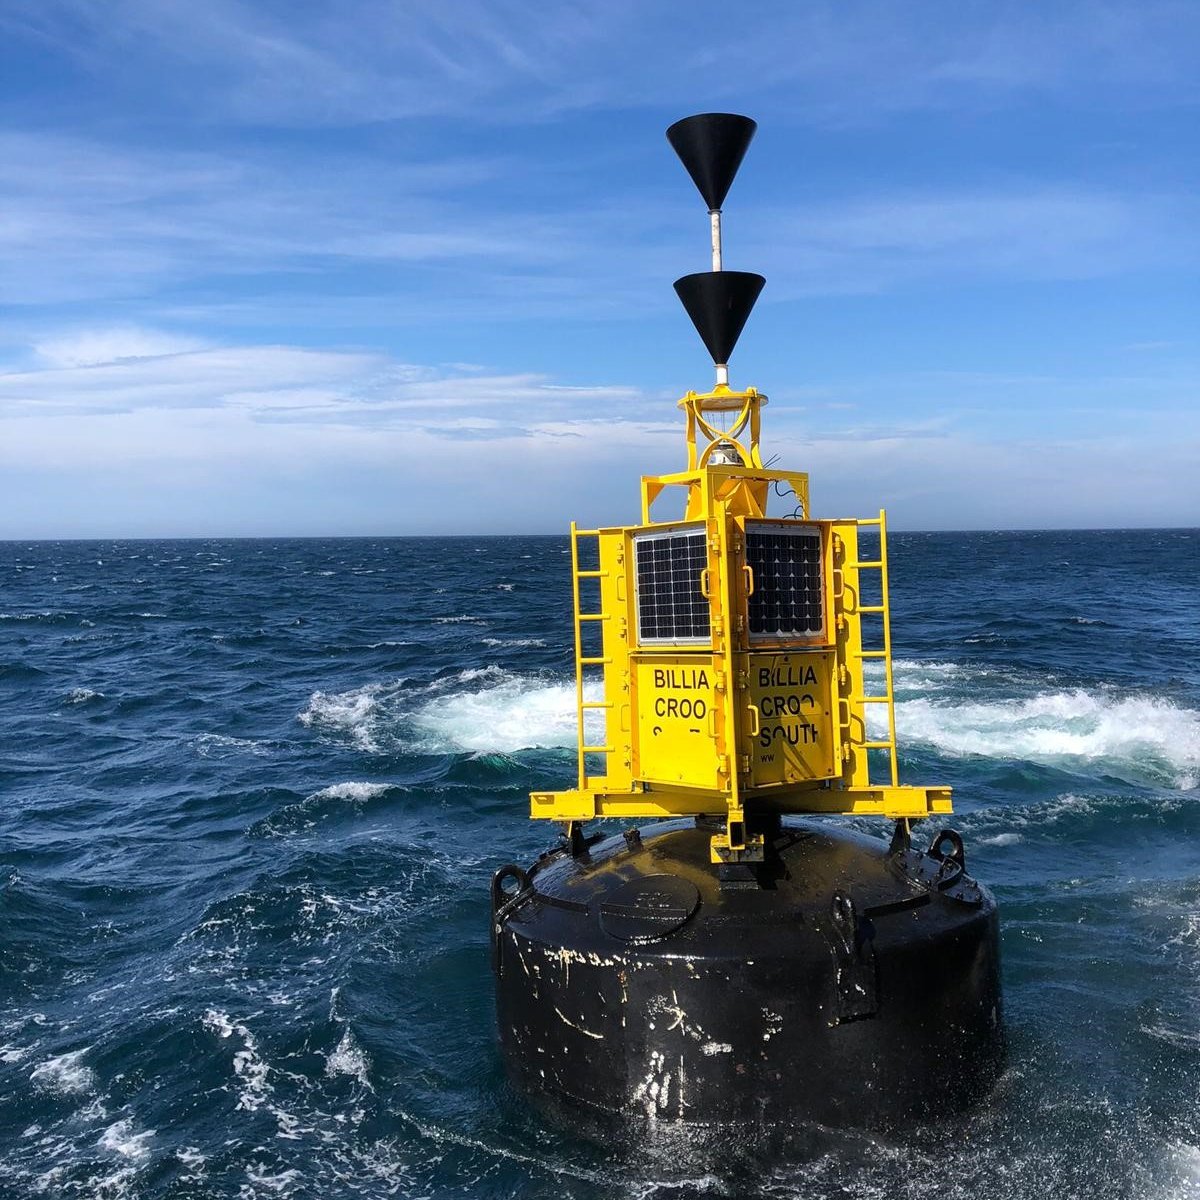 We have issued Notice to Mariners, No 1 of 2023 - FLOATING AIDS TO NAVIGATION / LIGHTHOUSE LANDINGS Scotland and Isle Of Man, All Areas
nlb.org.uk/navigation/not…
#mariners #maritime #noticetomariners